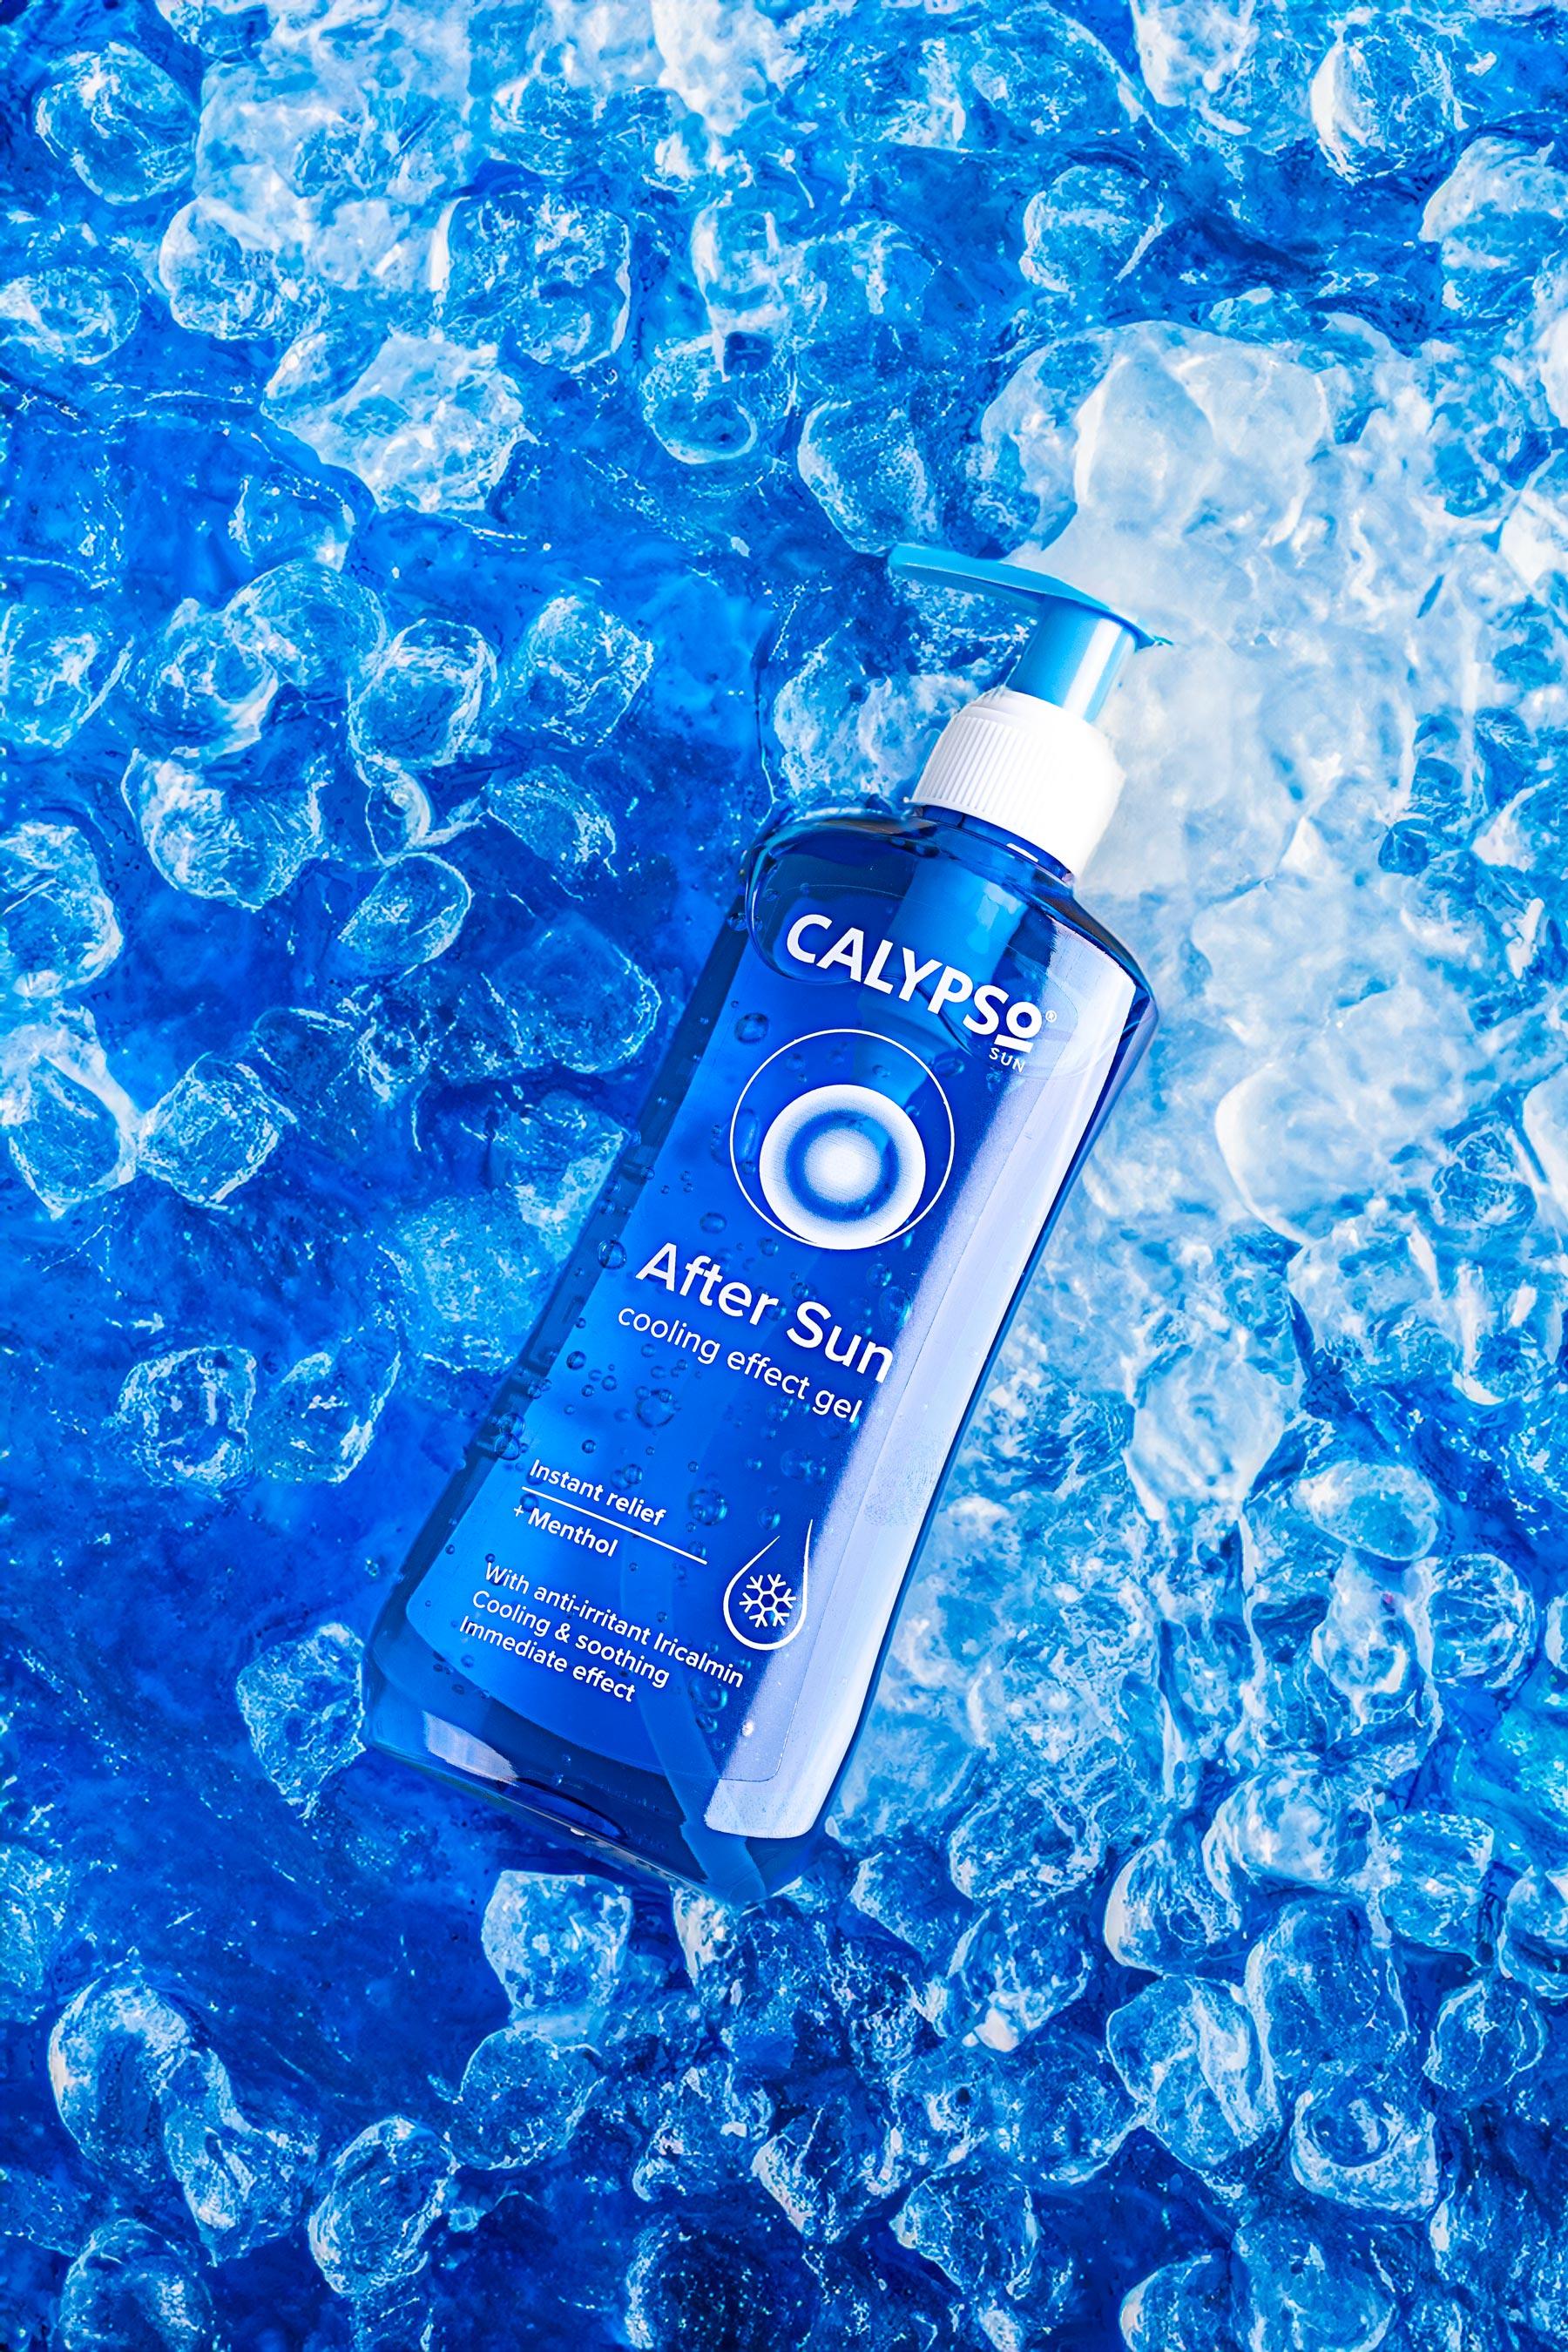 Calypso Aftersun Cooling effect lifestyle